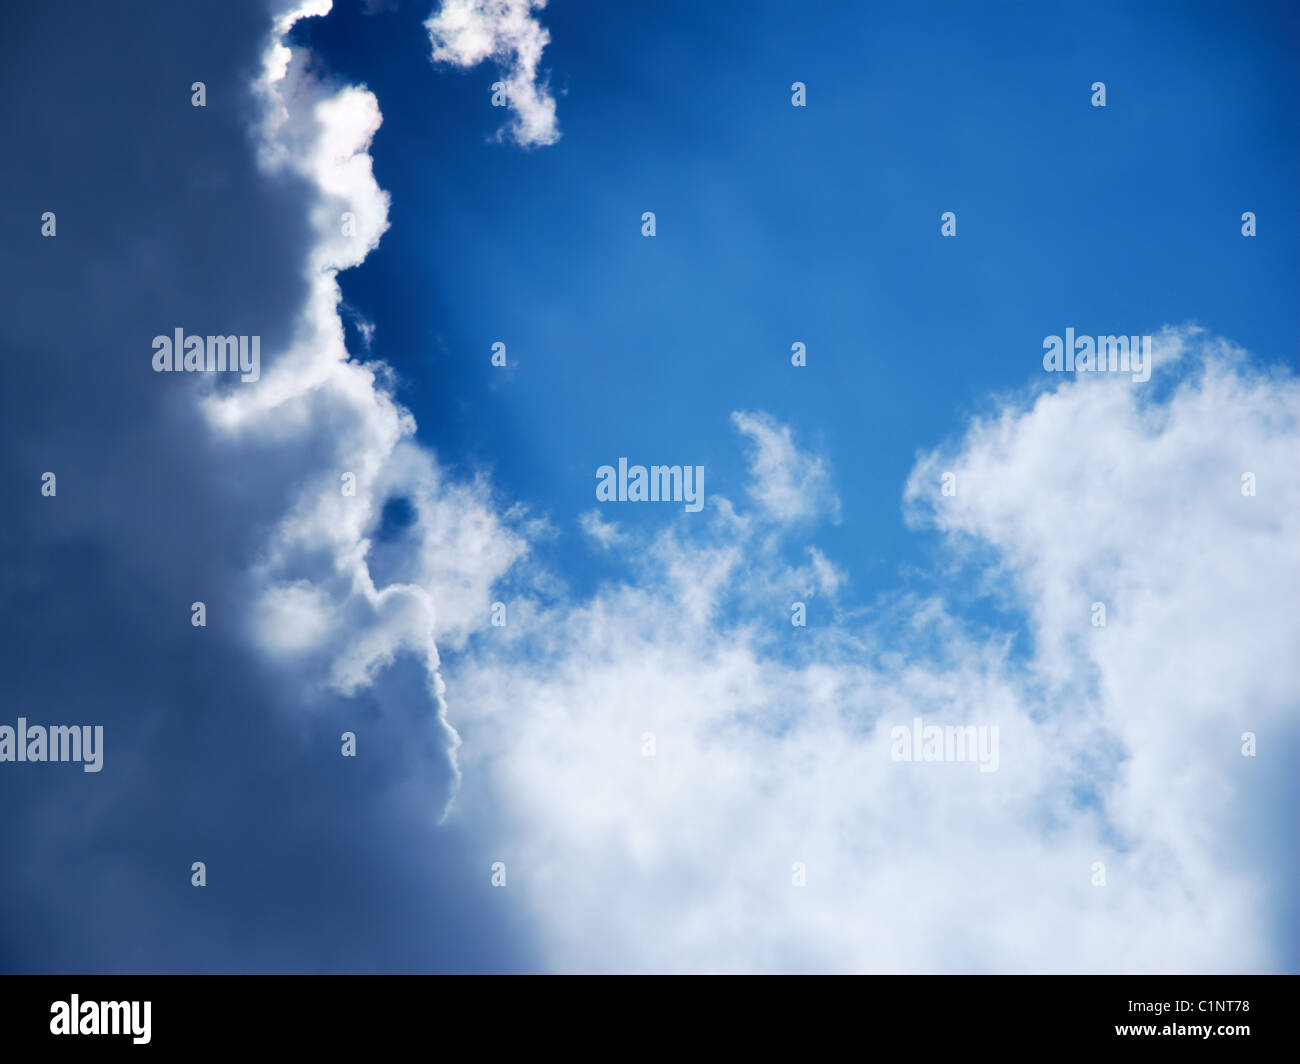 Moody sky with clear blue surrounded by dark clouds Stock Photo